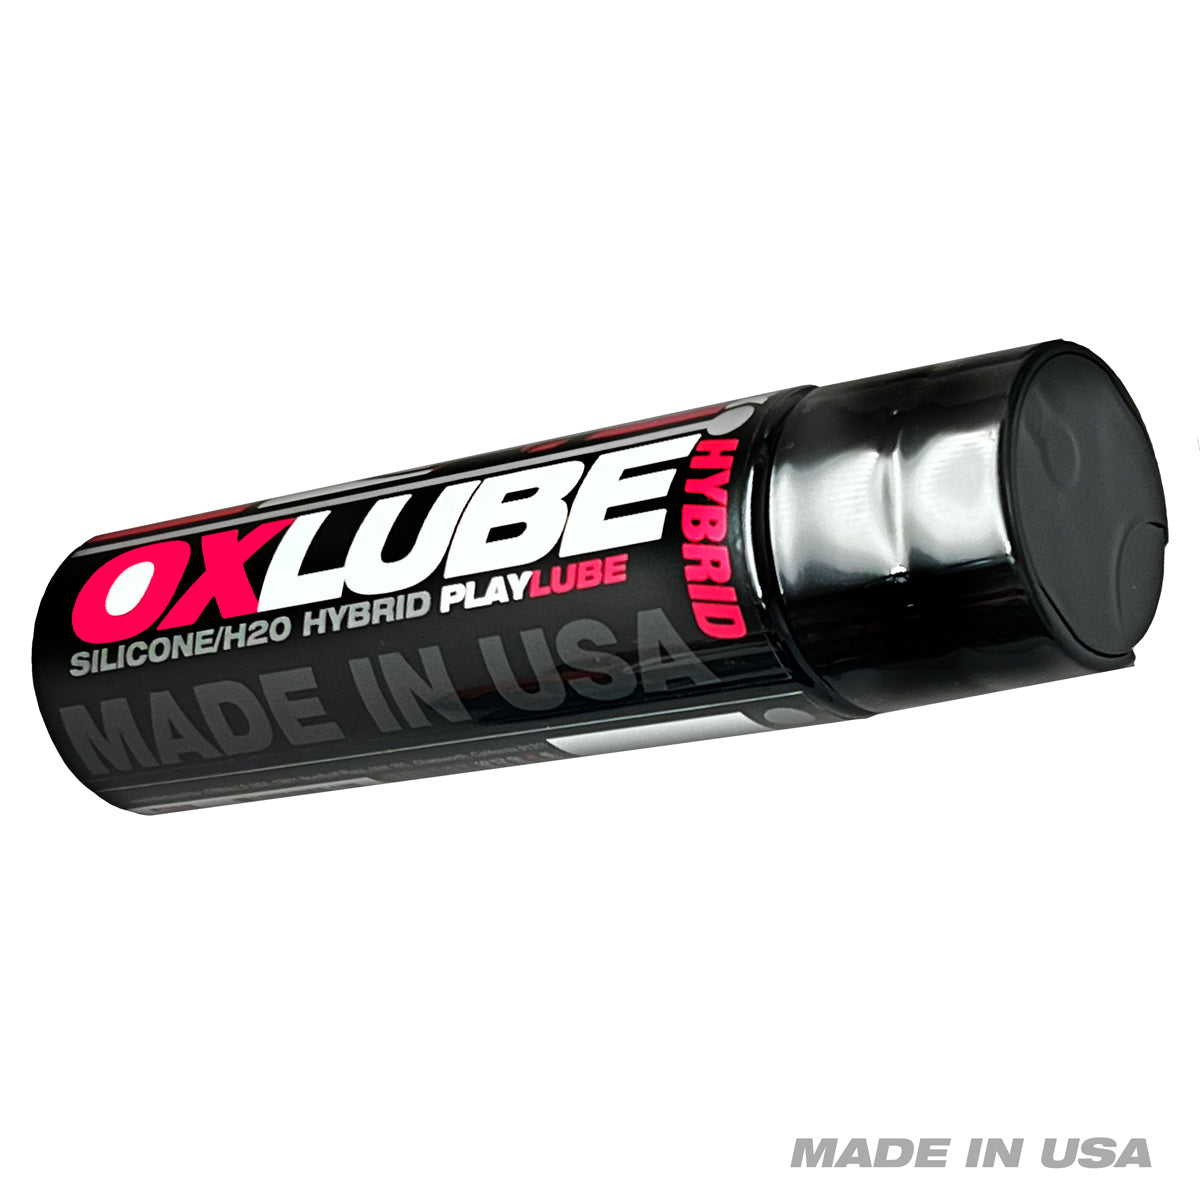 OXBALLS OXLUBE • Hybrid (Silicone + Water) Lubricant